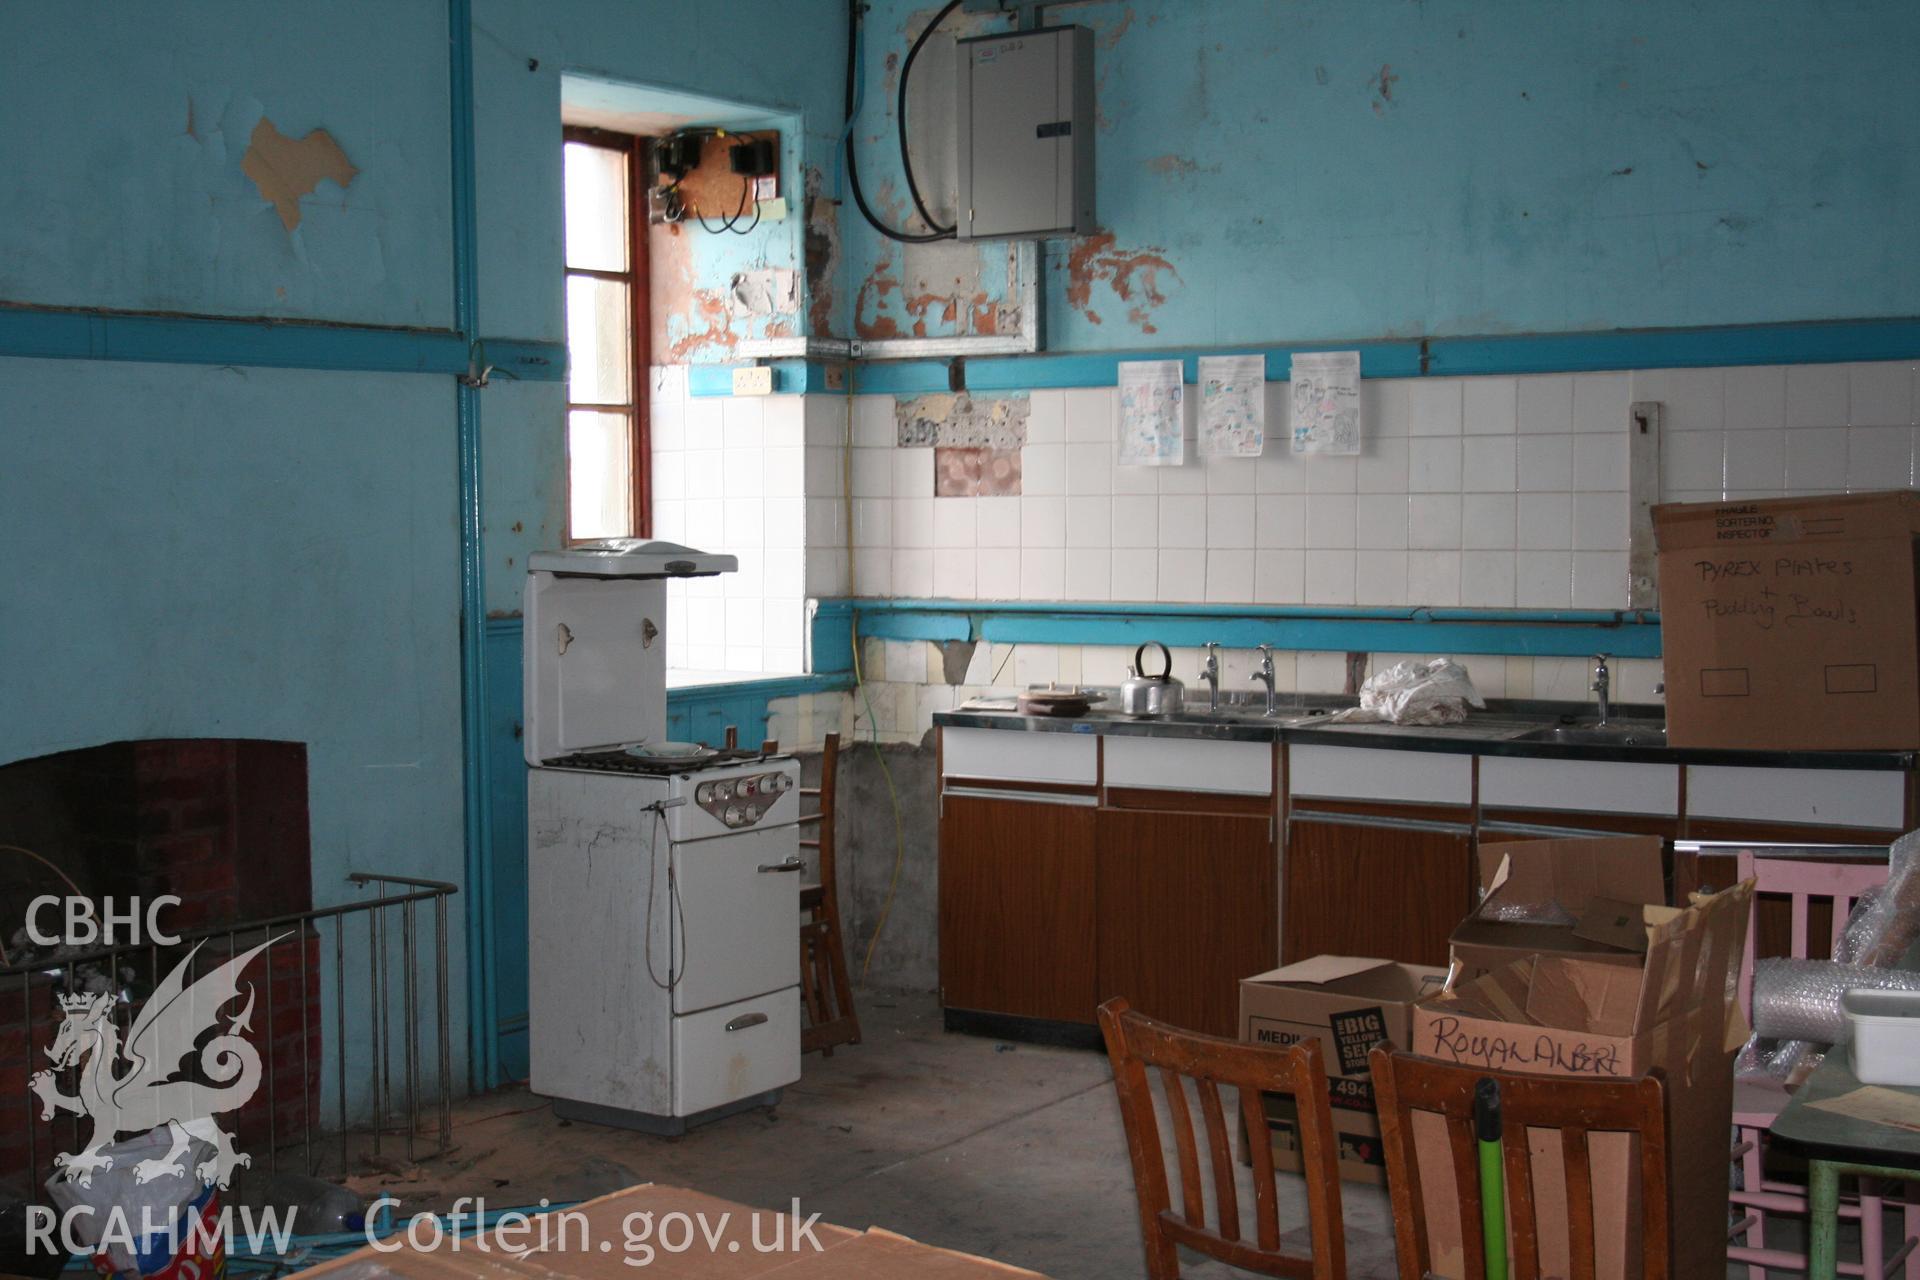 Hanbury Road baptist chapel, Bargoed, digital colour photograph showing kitchen, received in the course of Emergency Recording case ref no RCS2/1/2247.